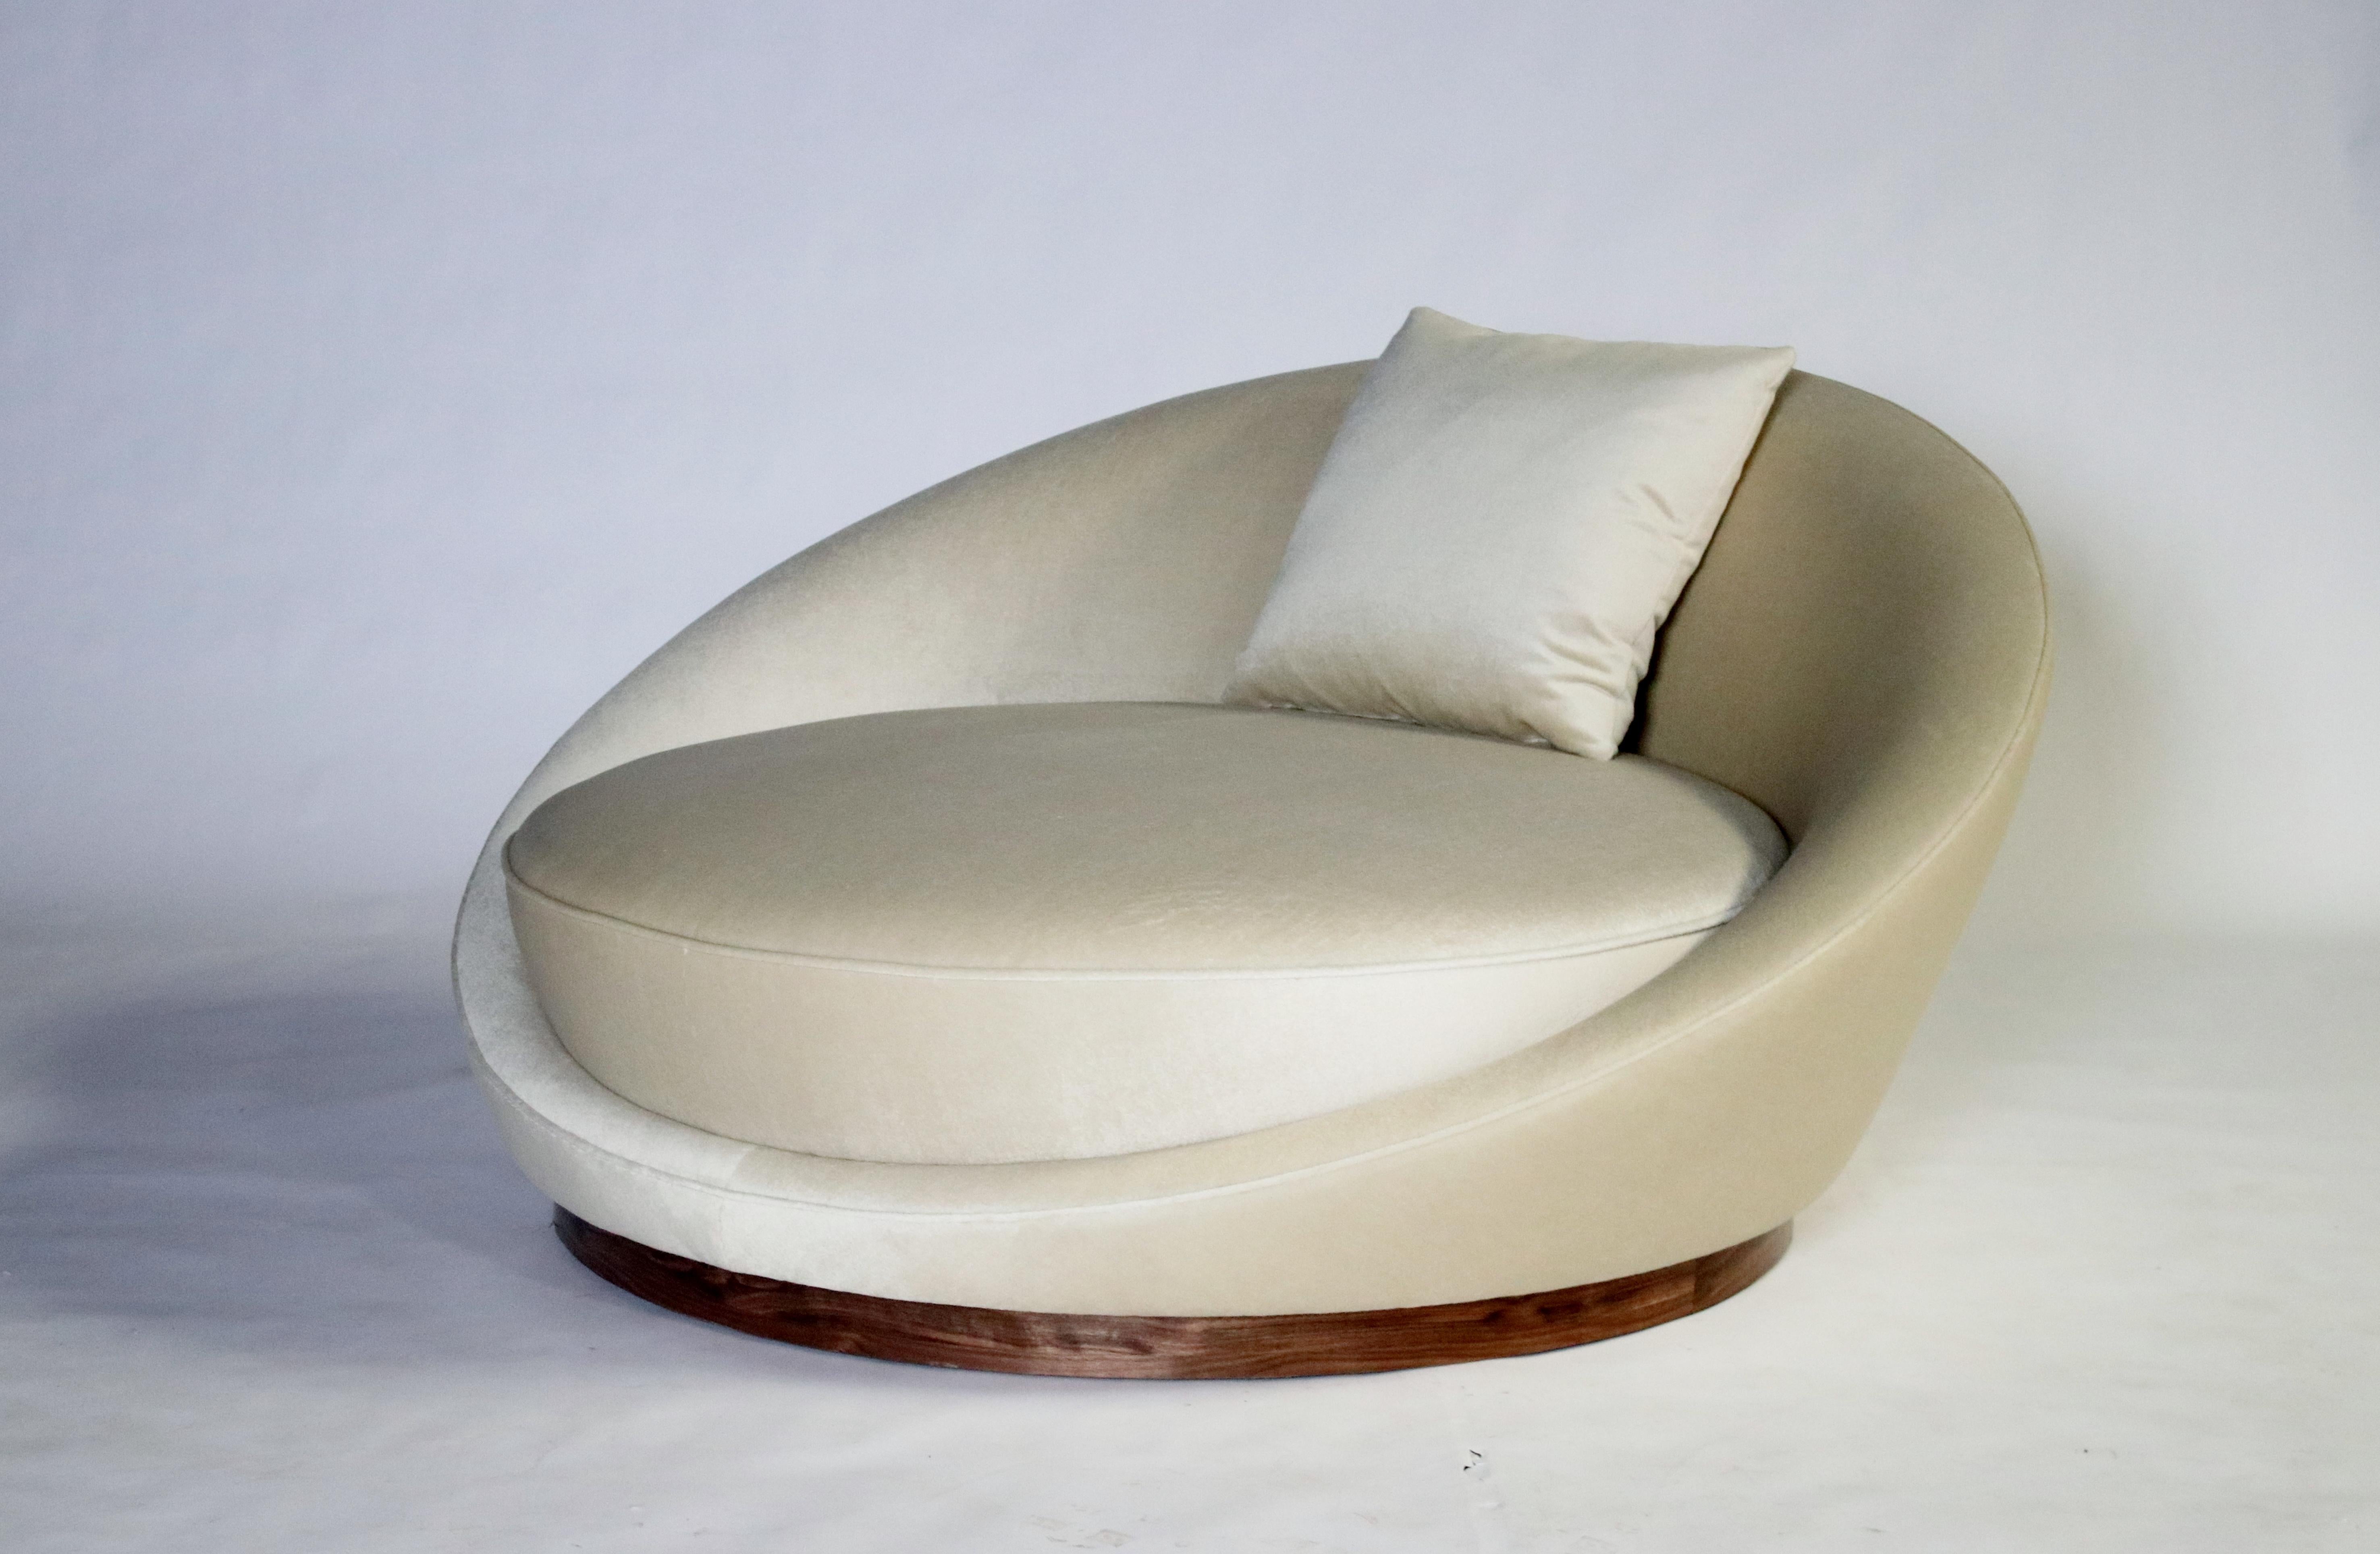 Milo Baughman 1970's round chair or saucer shape chaise lounge on a walnut plinth meticulously restored and reupholstered in a cream color mohair.